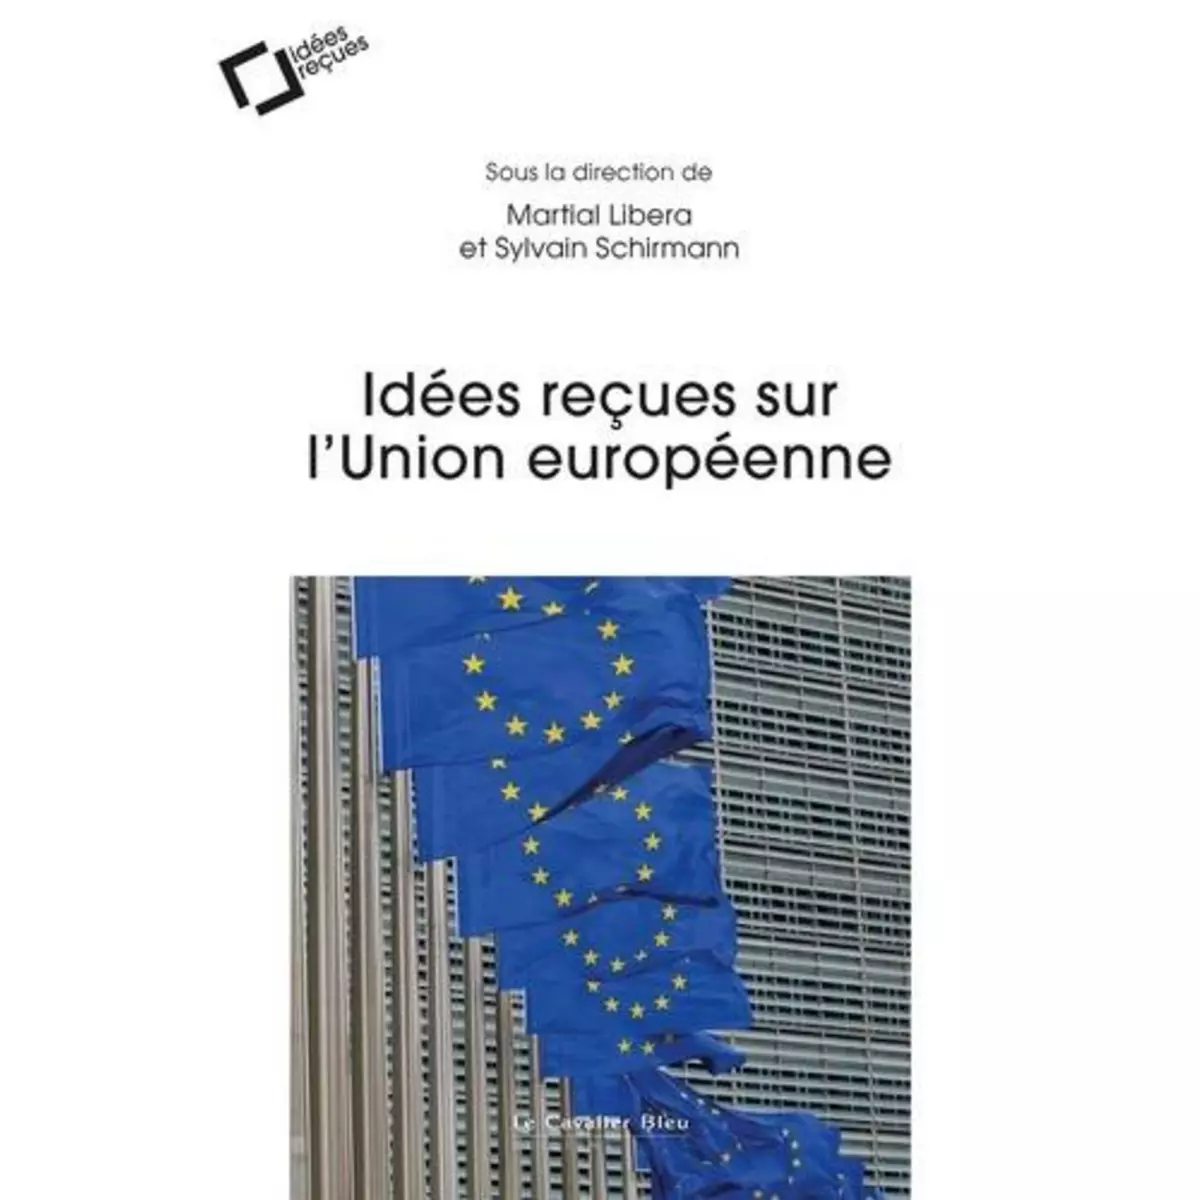  IDEES RECUES SUR L'UNION EUROPEENNE, Libera Martial